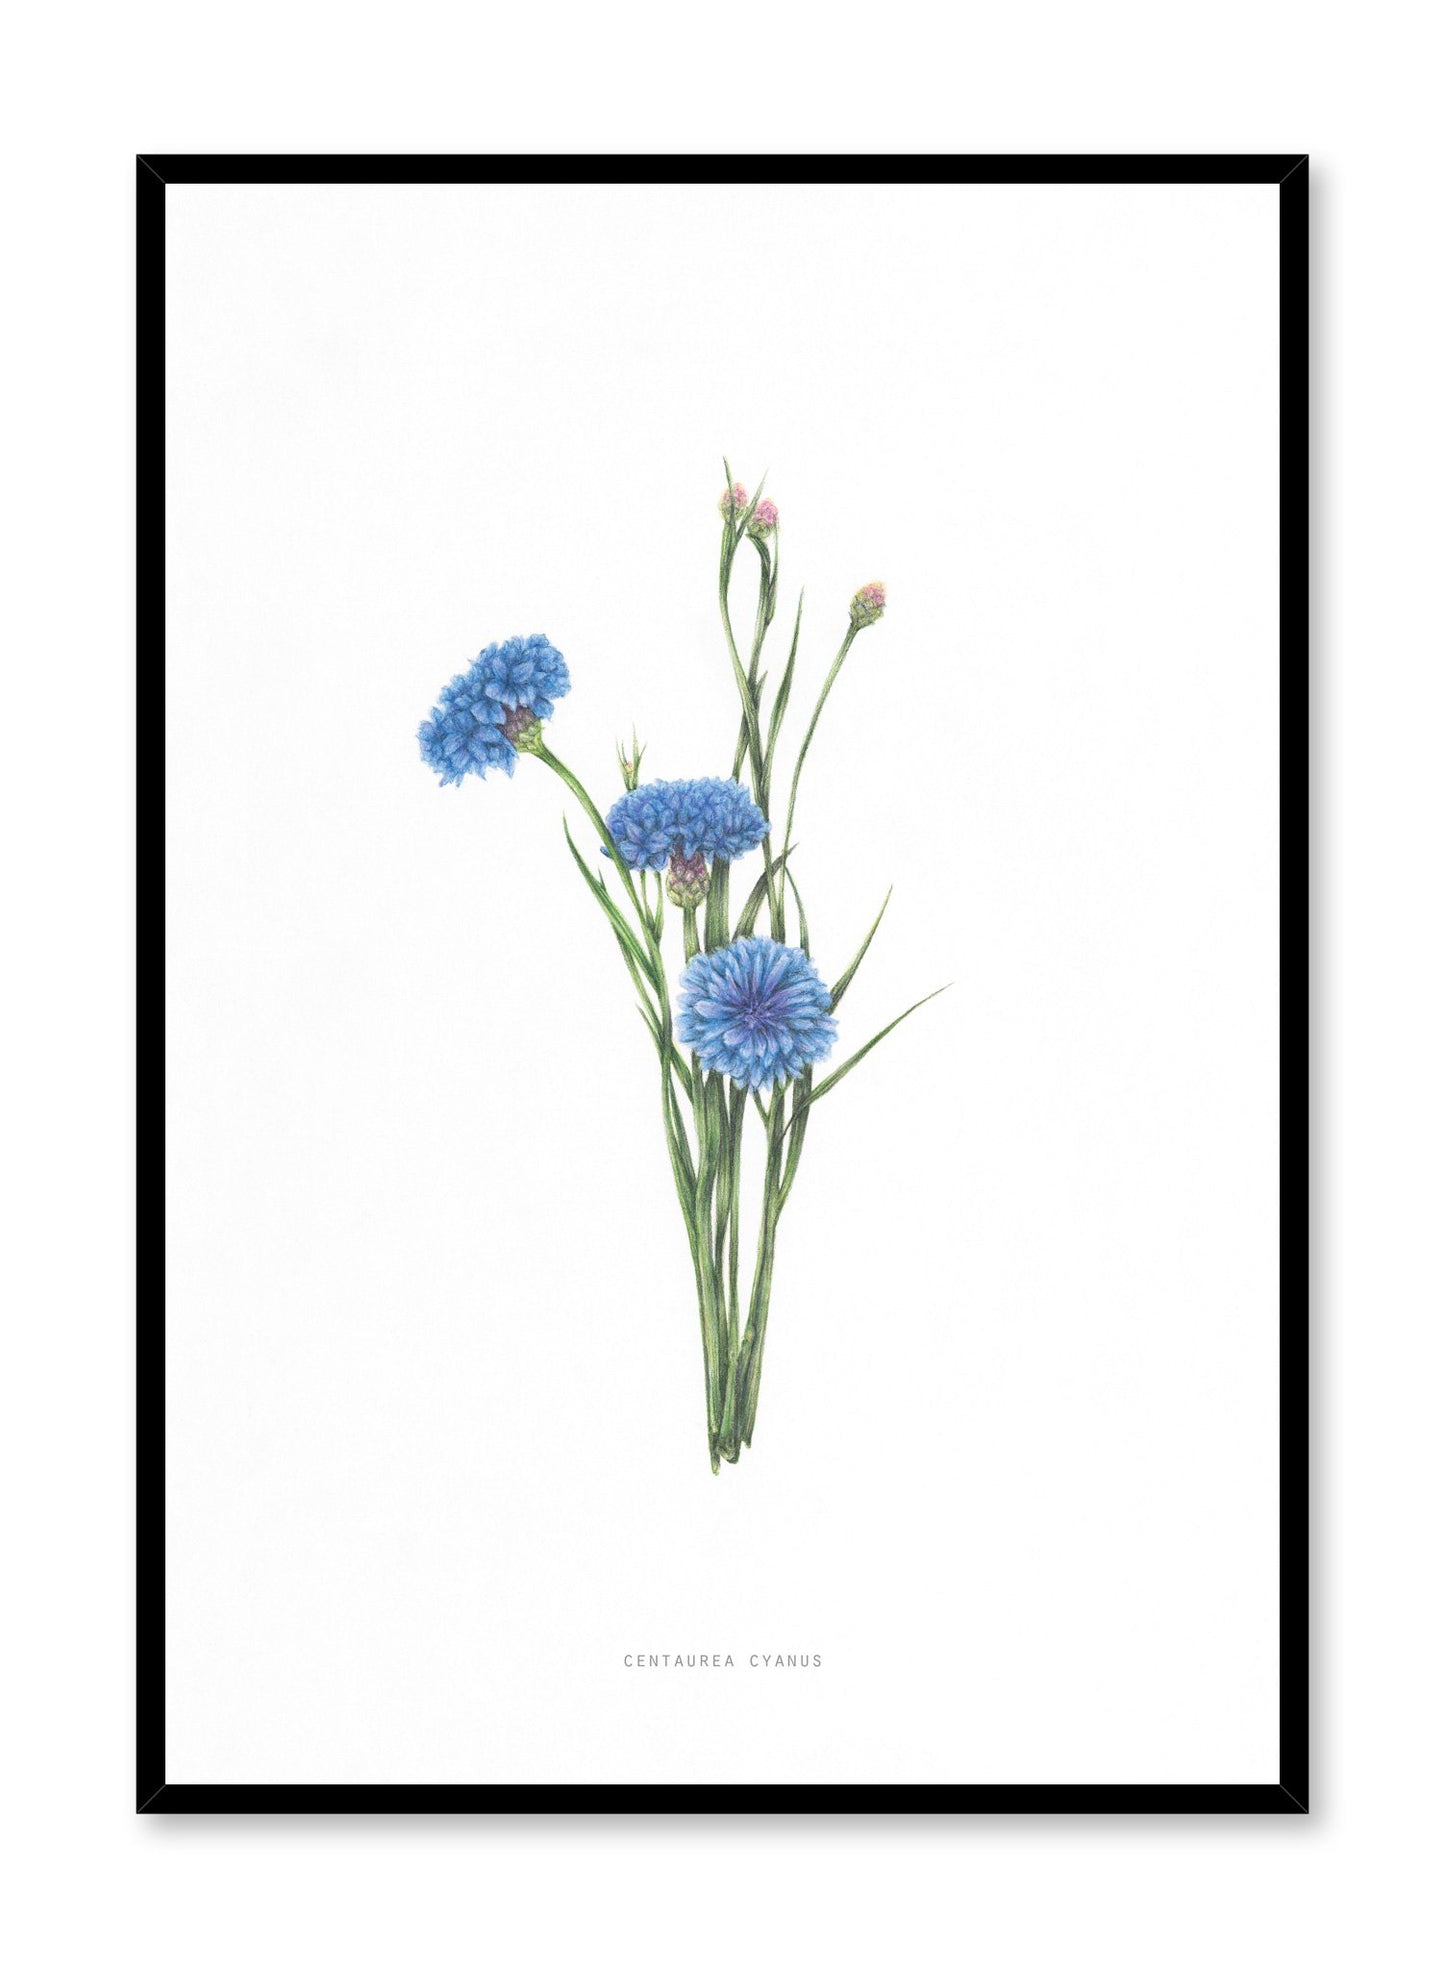 Modern minimalist poster by Opposite Wall with encyclopedic illustration of Centaura Cyanus